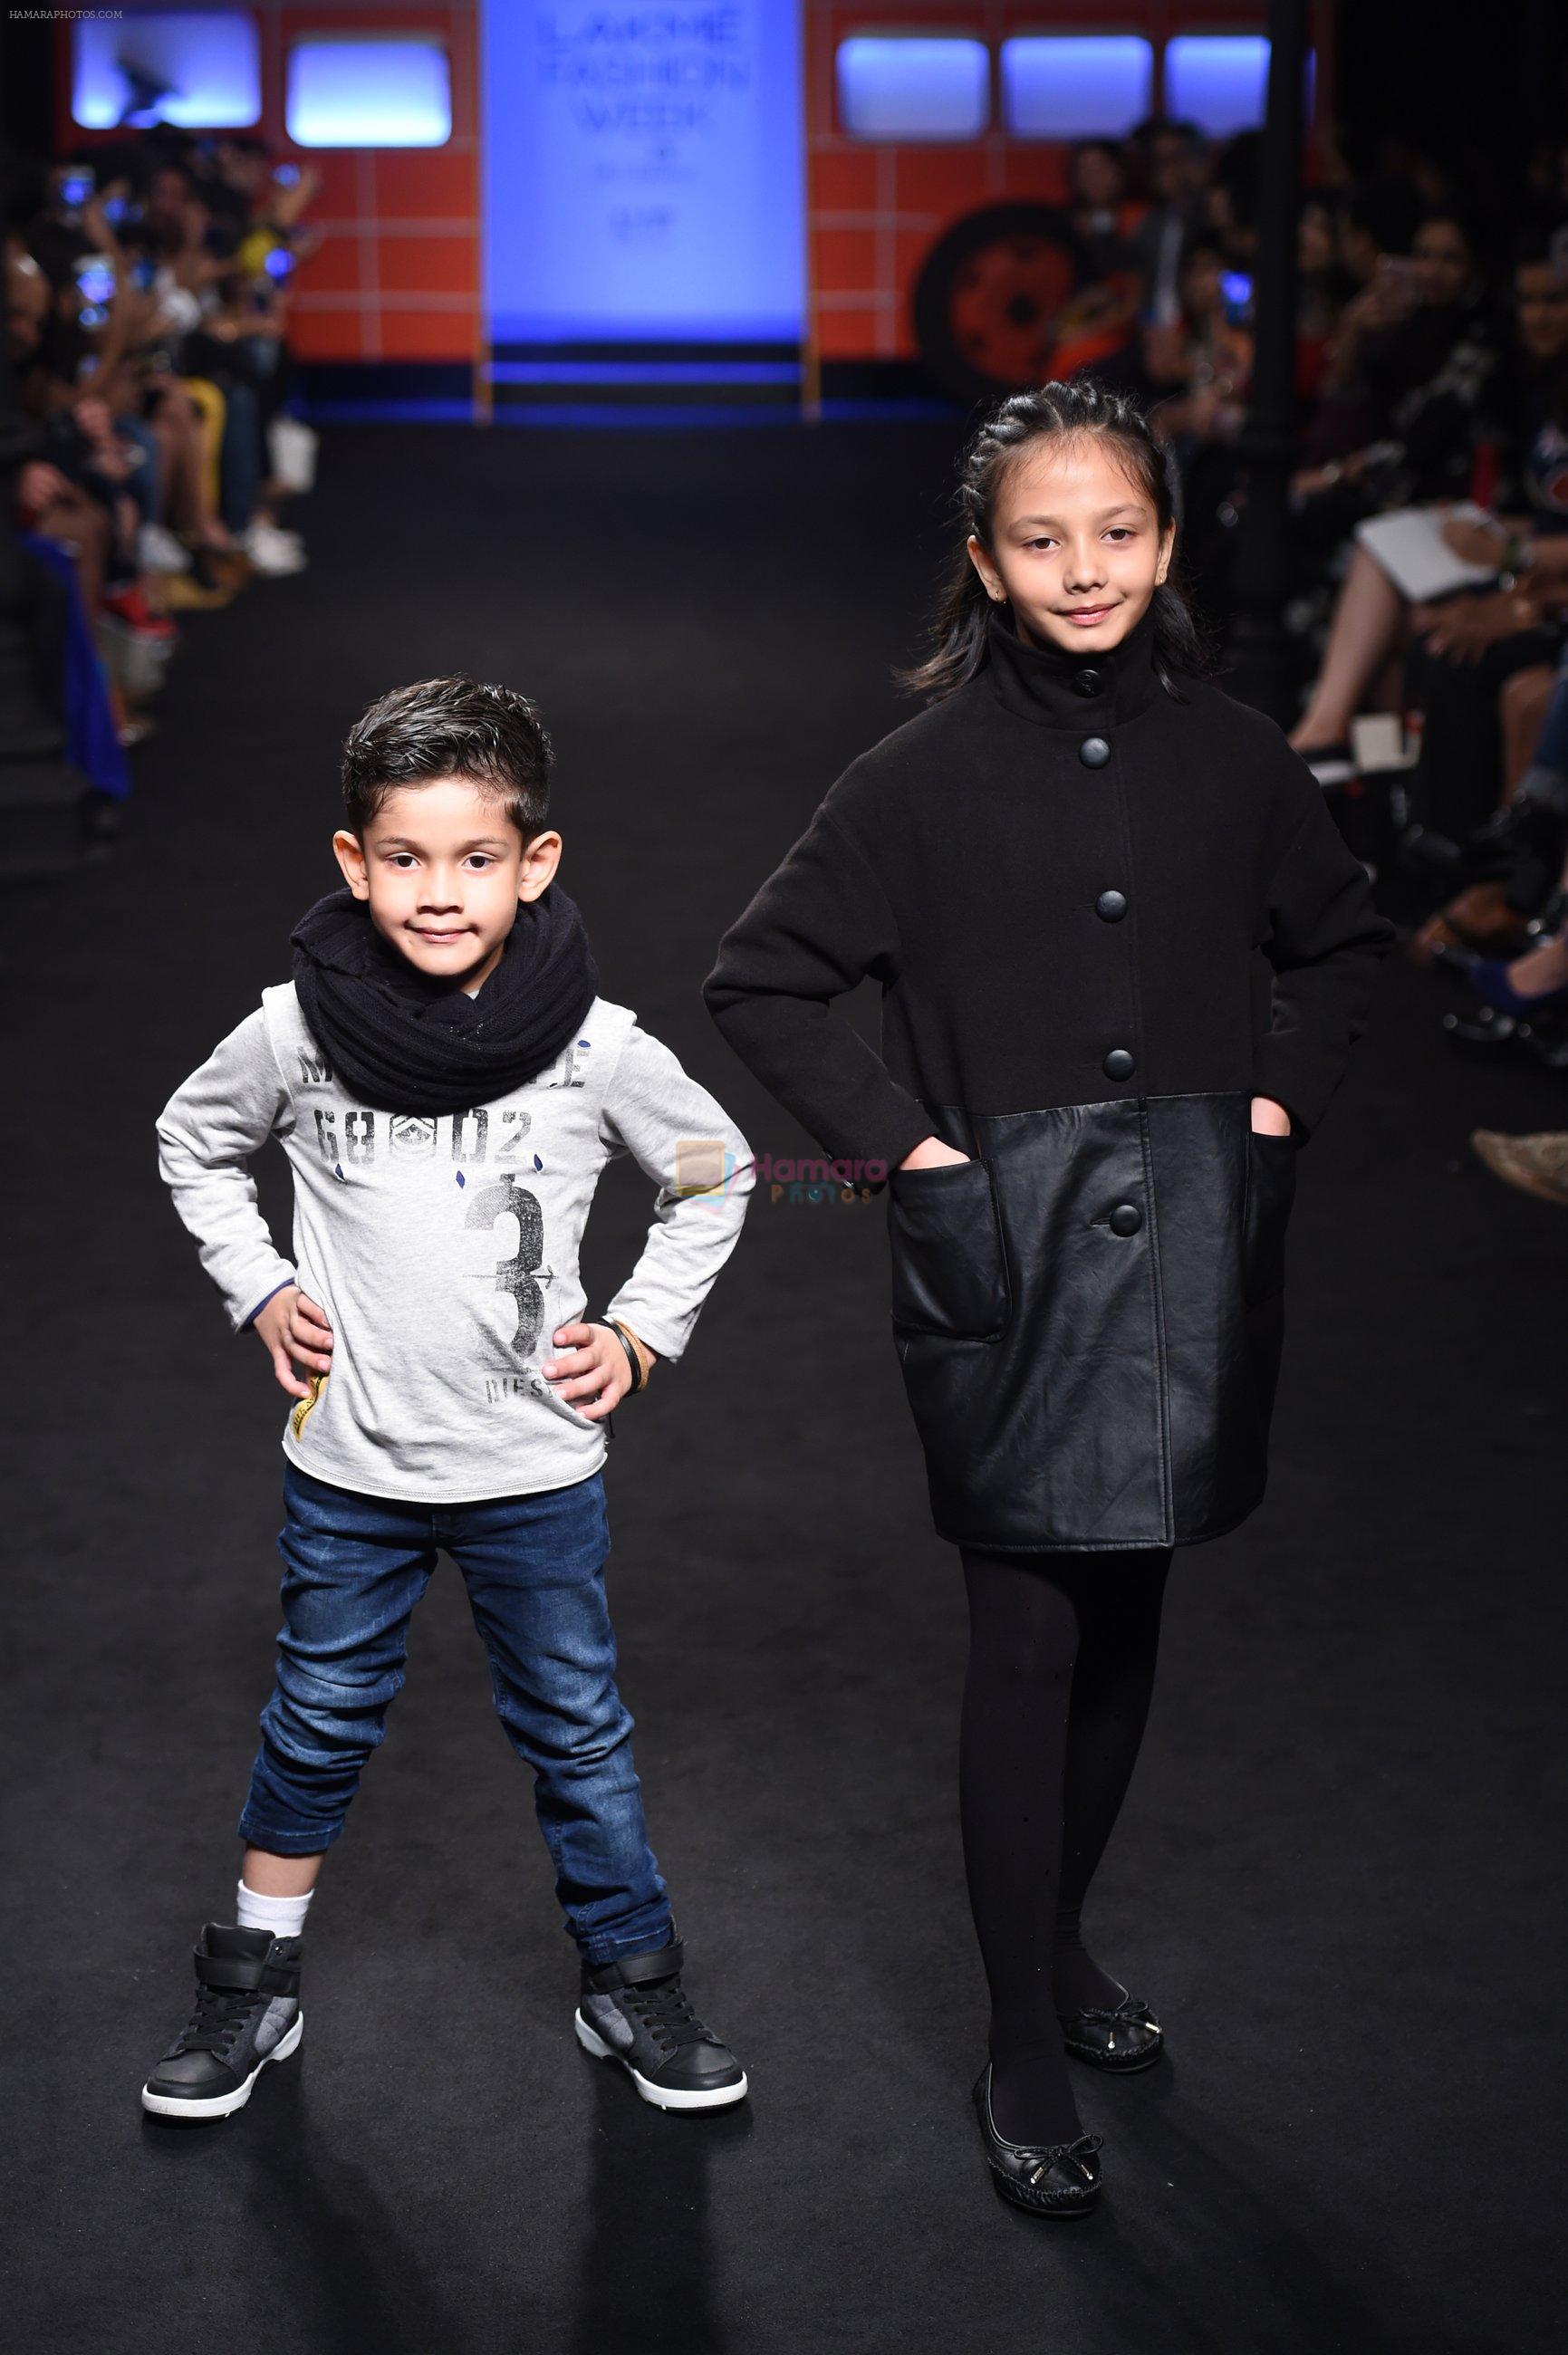 Model walk the ramp for The Hamleys Show styled by Diesel Show at Lakme Fashion Week 2016 on 28th Aug 2016